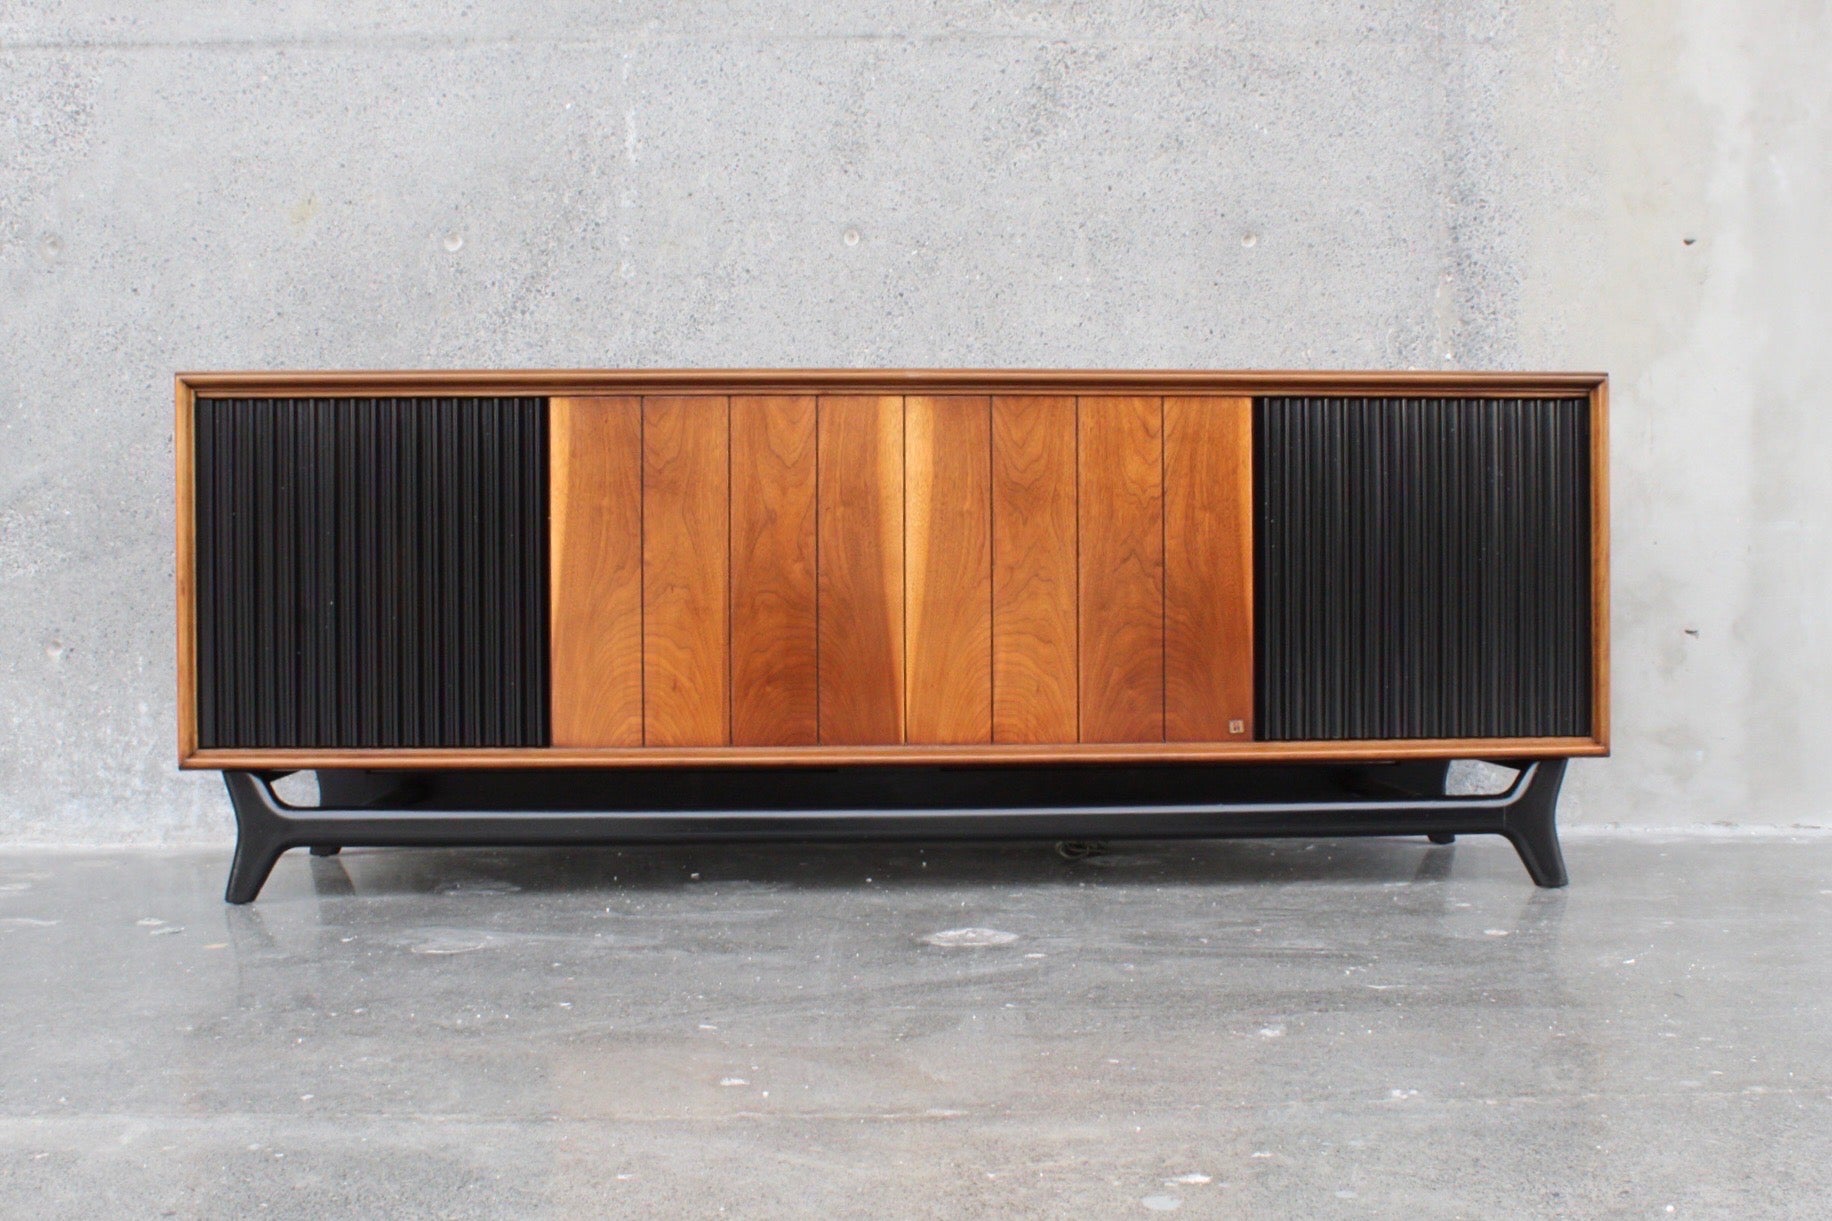 Spectacular midcentury console made in the 1960s, walnut wood, the original system we believe does not work. The entire exterior and interior was professionally restored.